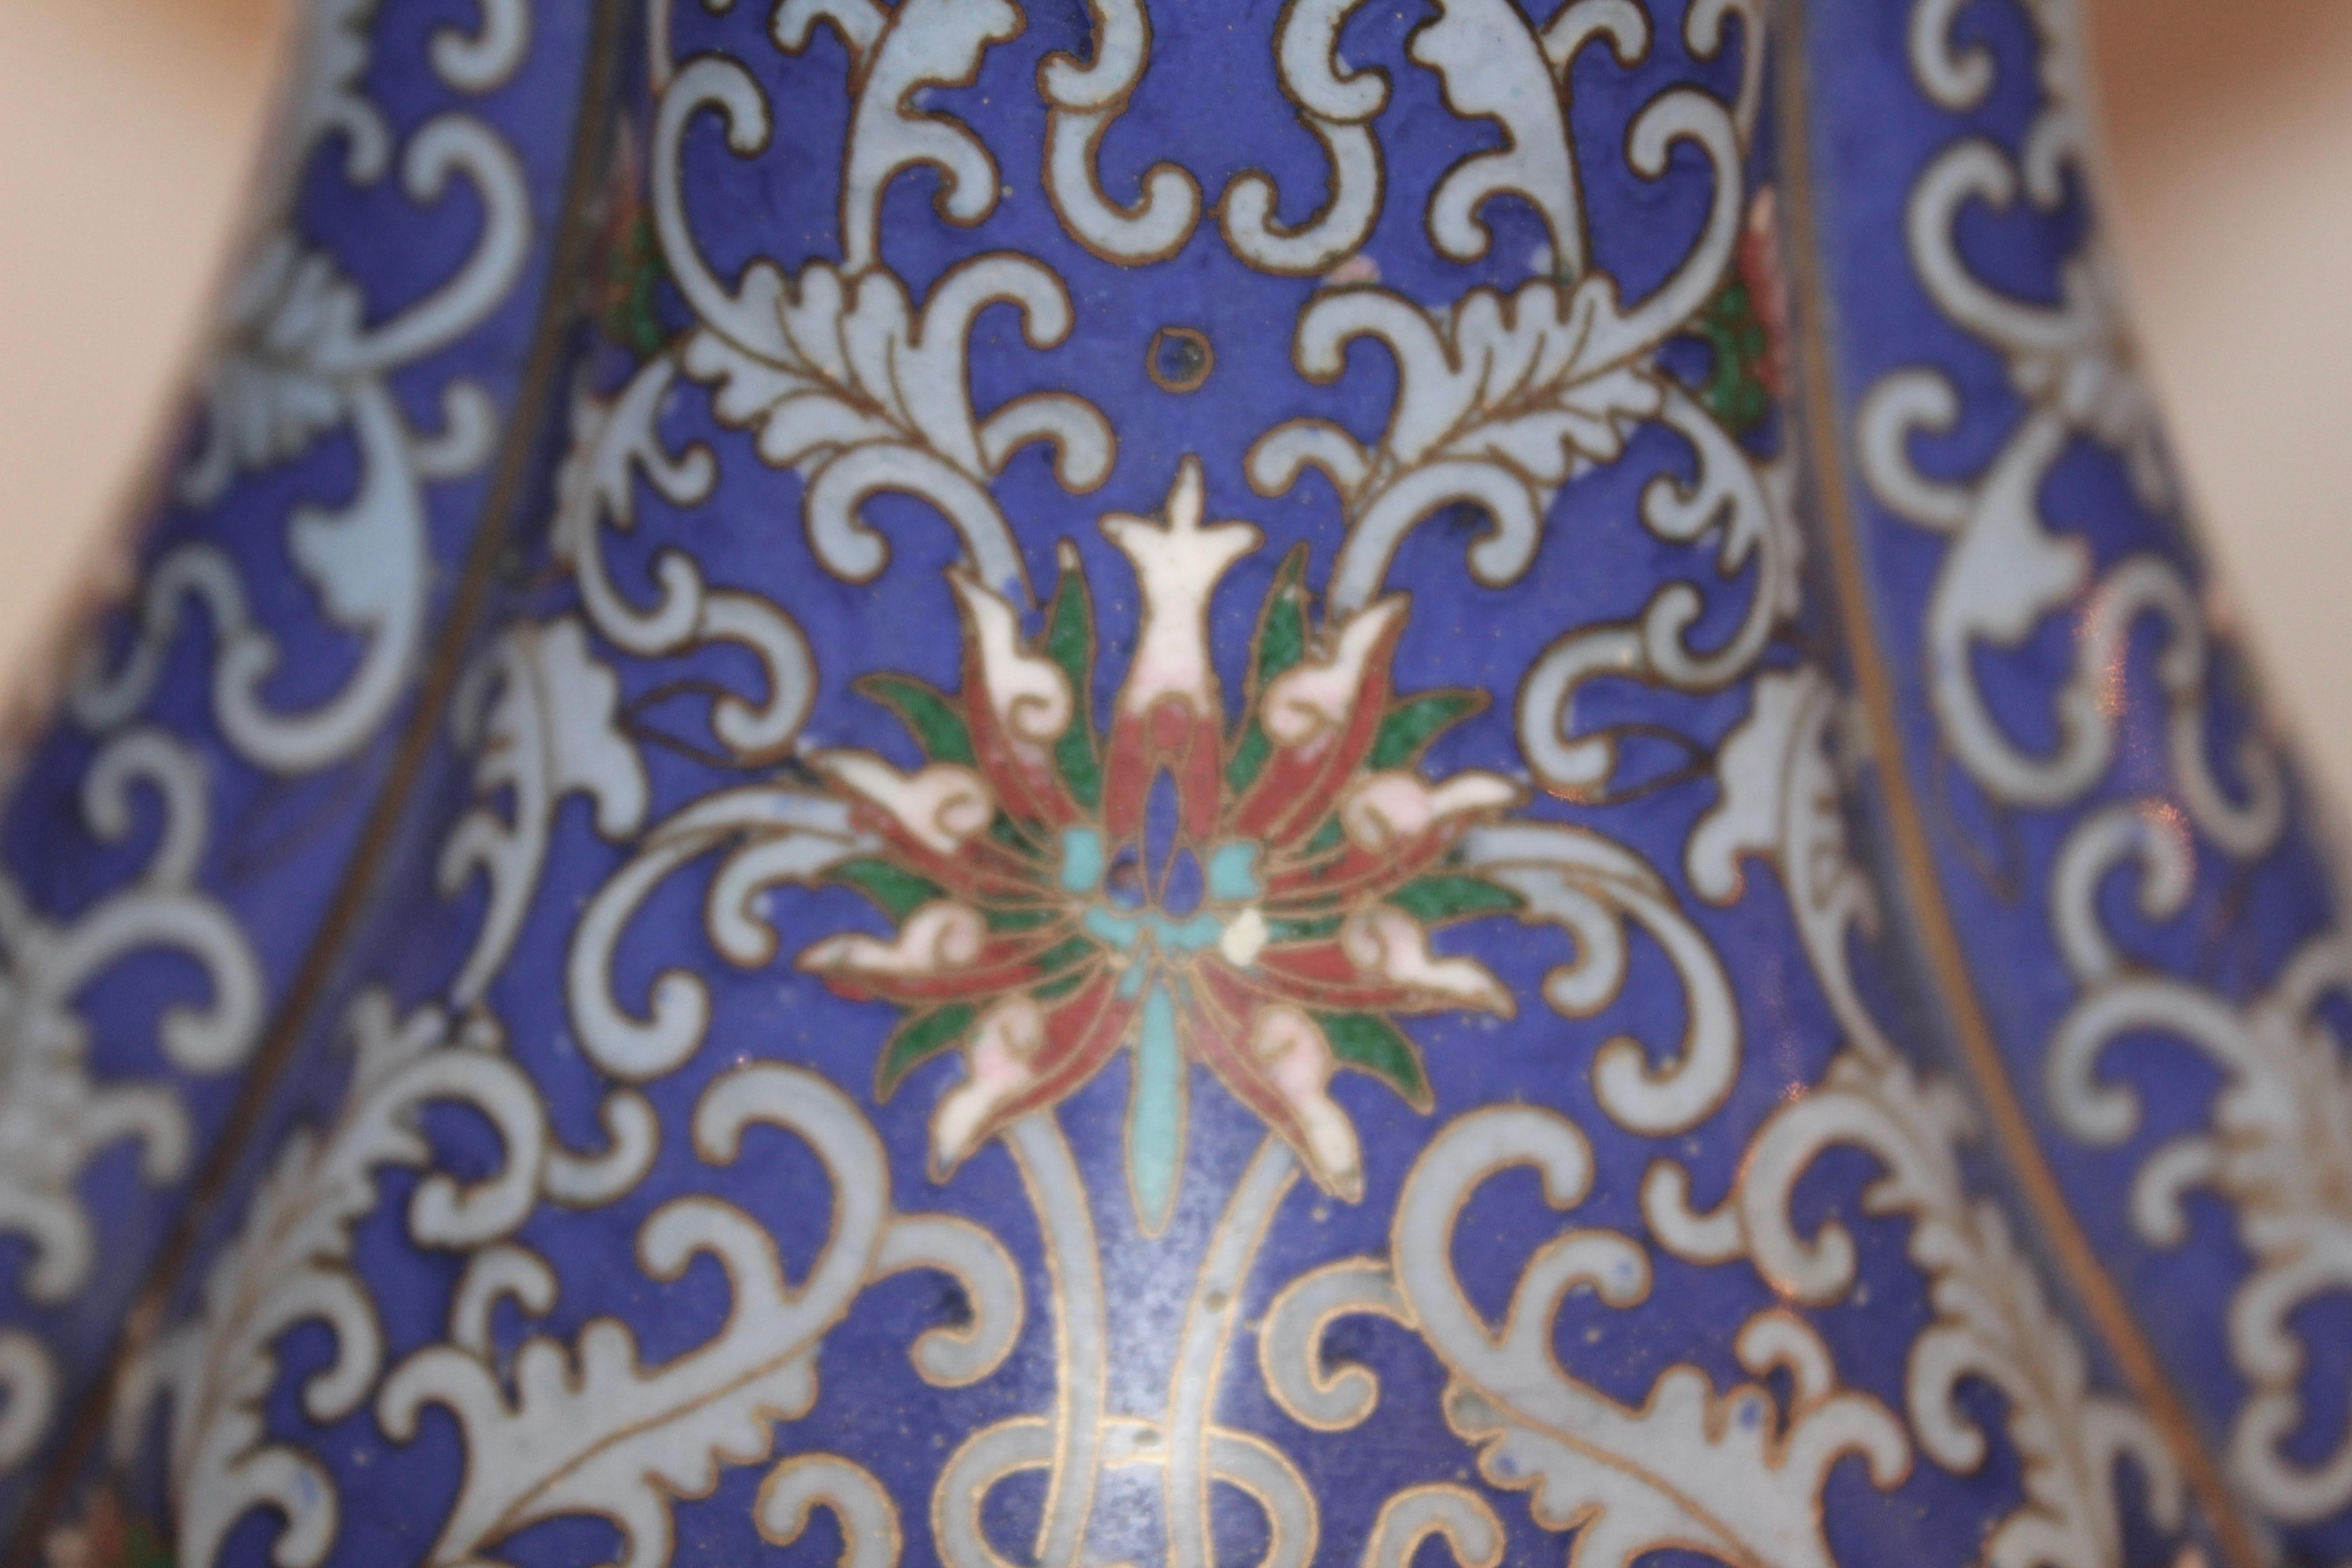 Pair of 1920s Chinese lobed shaped cloisonné enamel vases, the interior in a gold ground, and the blue exterior intricately decorated with brightly colored floral panels and arabesque ground. The base of each vase with a border of blue and red